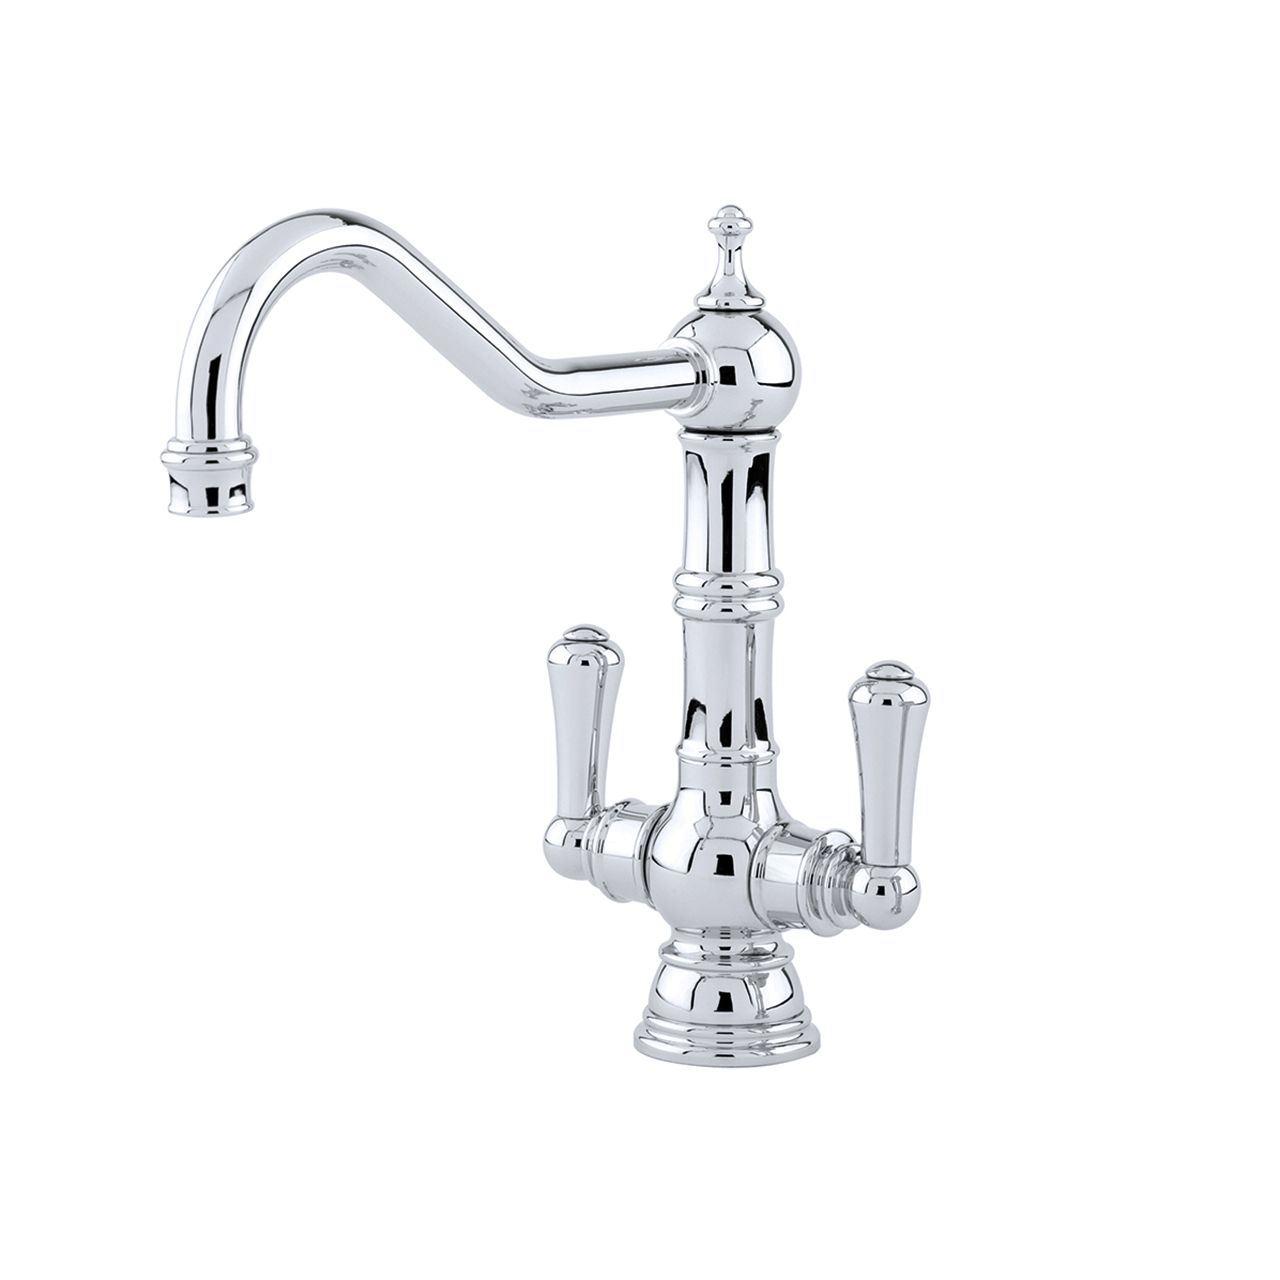 Provence Sink Mixer Tap with metal lever handles – Perrin & Rowe